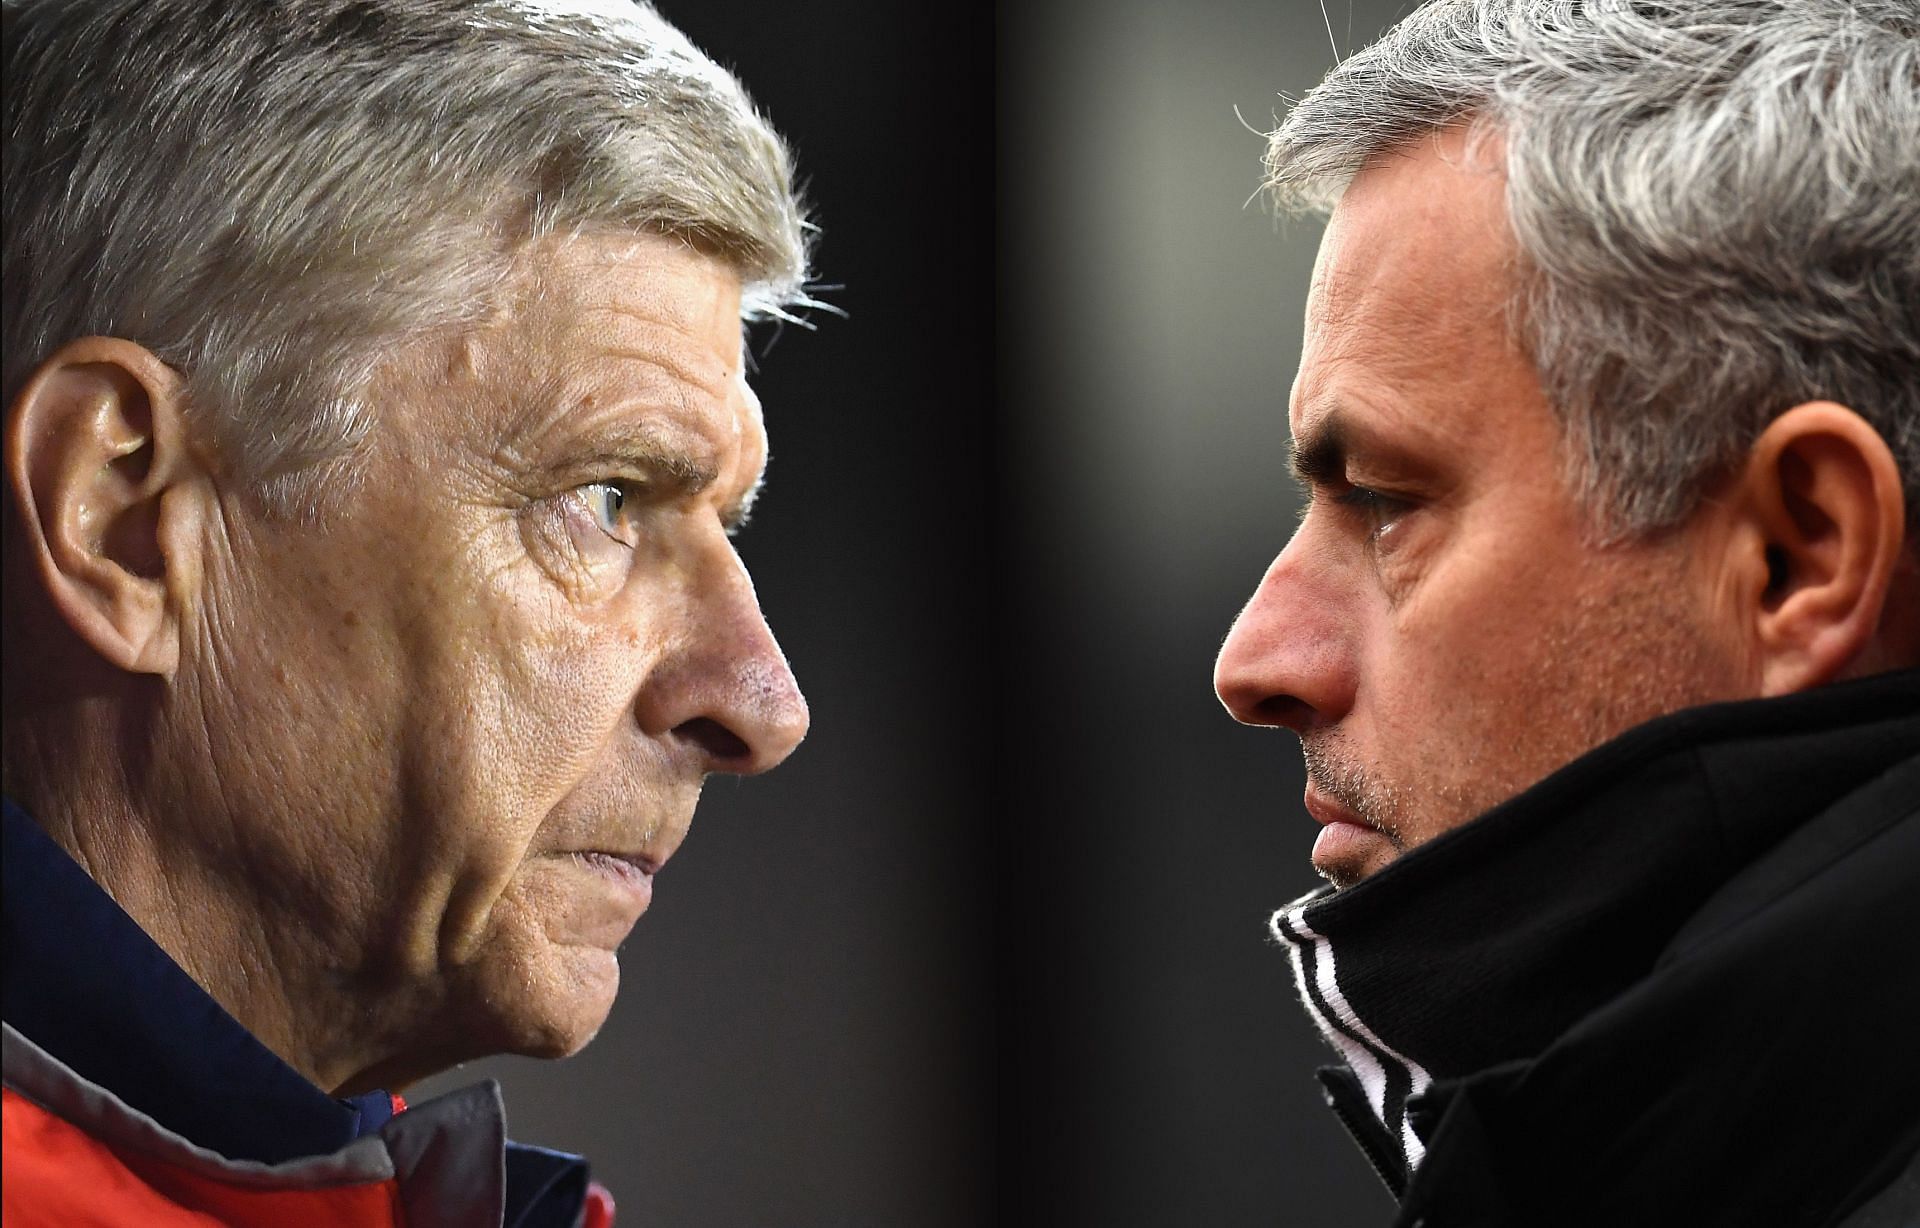 The rivalry between Mourinho and Wenger never disappointed in terms of entertainment